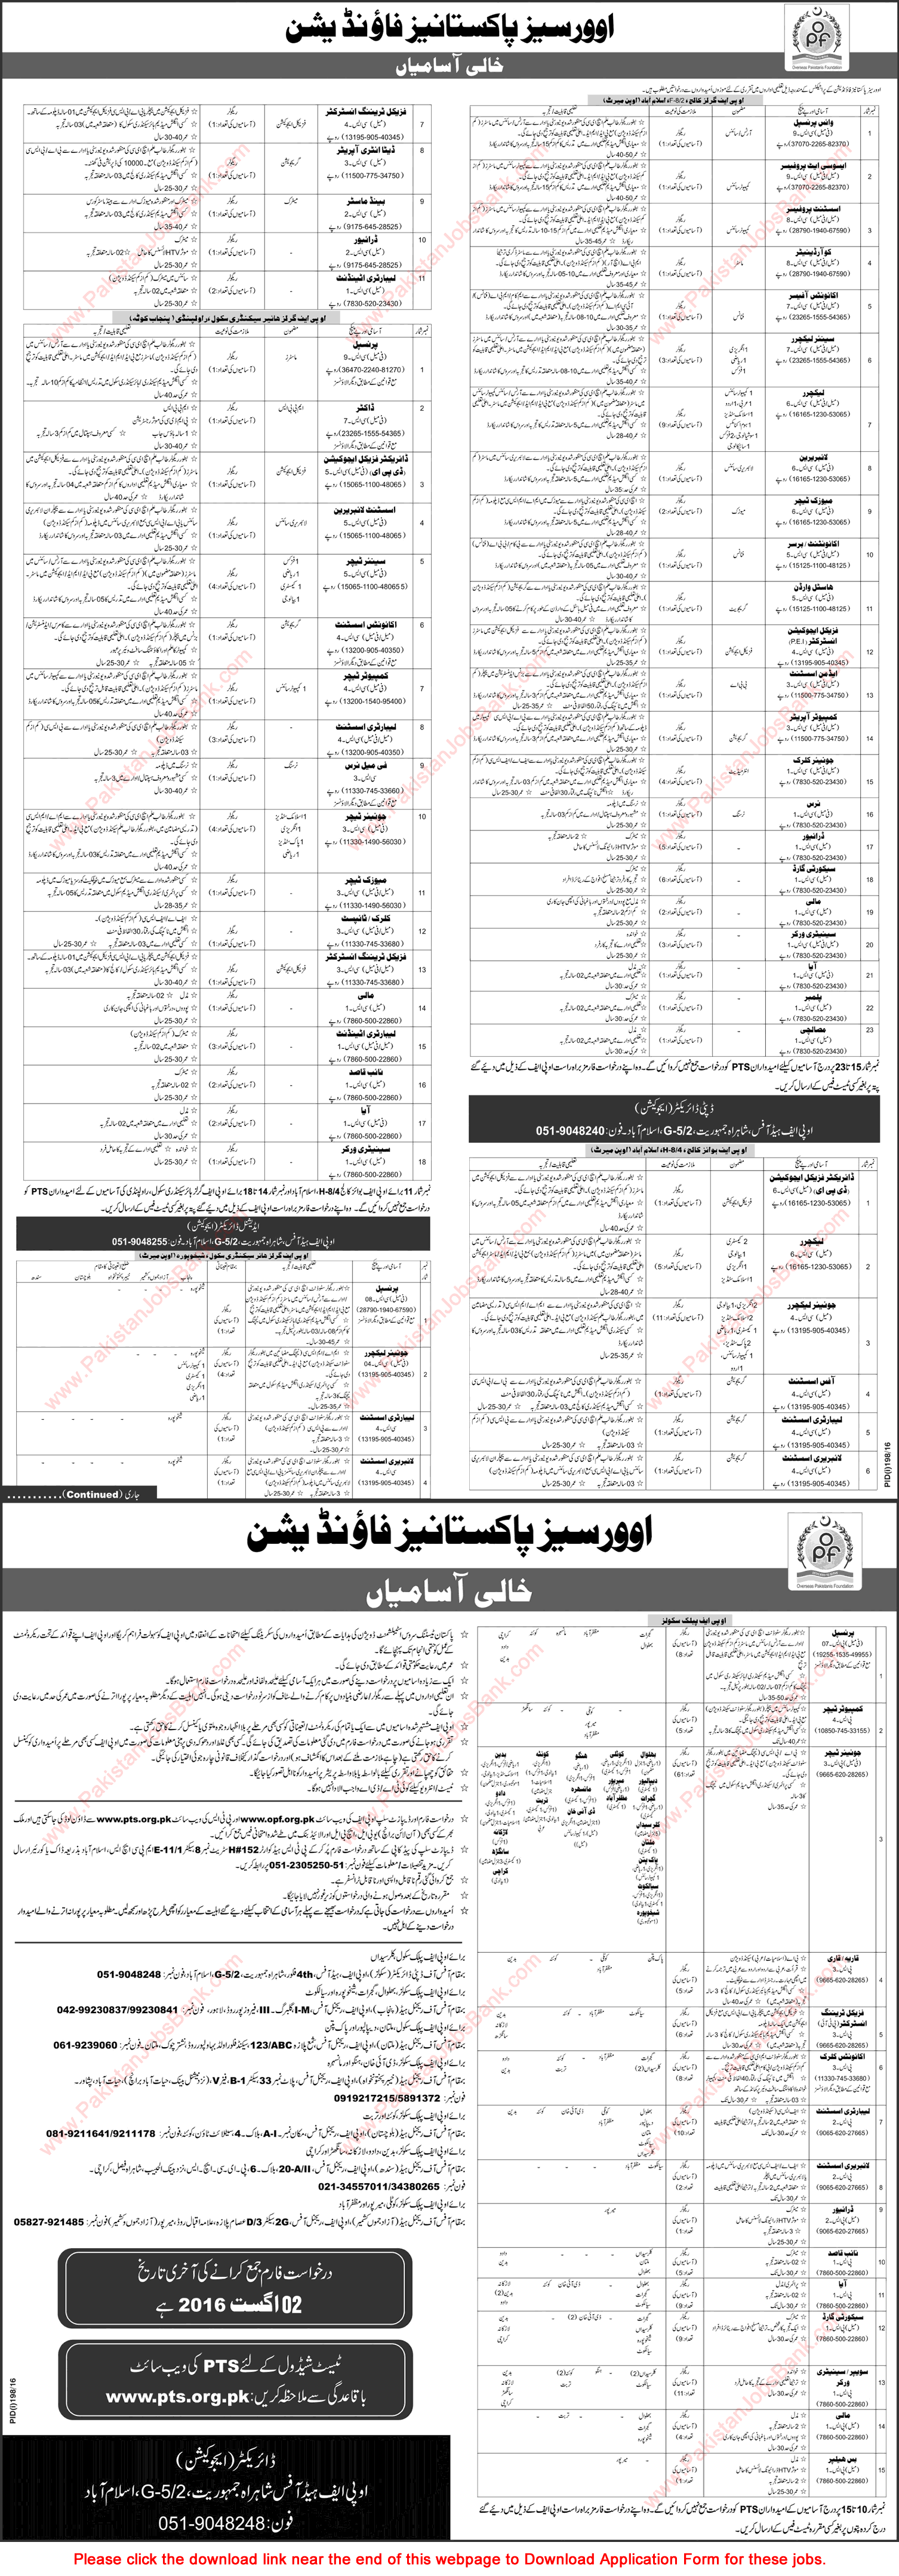 OPF Schools & Colleges Jobs 2016 July PTS Application Form Teaching Faculty, Admin & Support Staff Latest